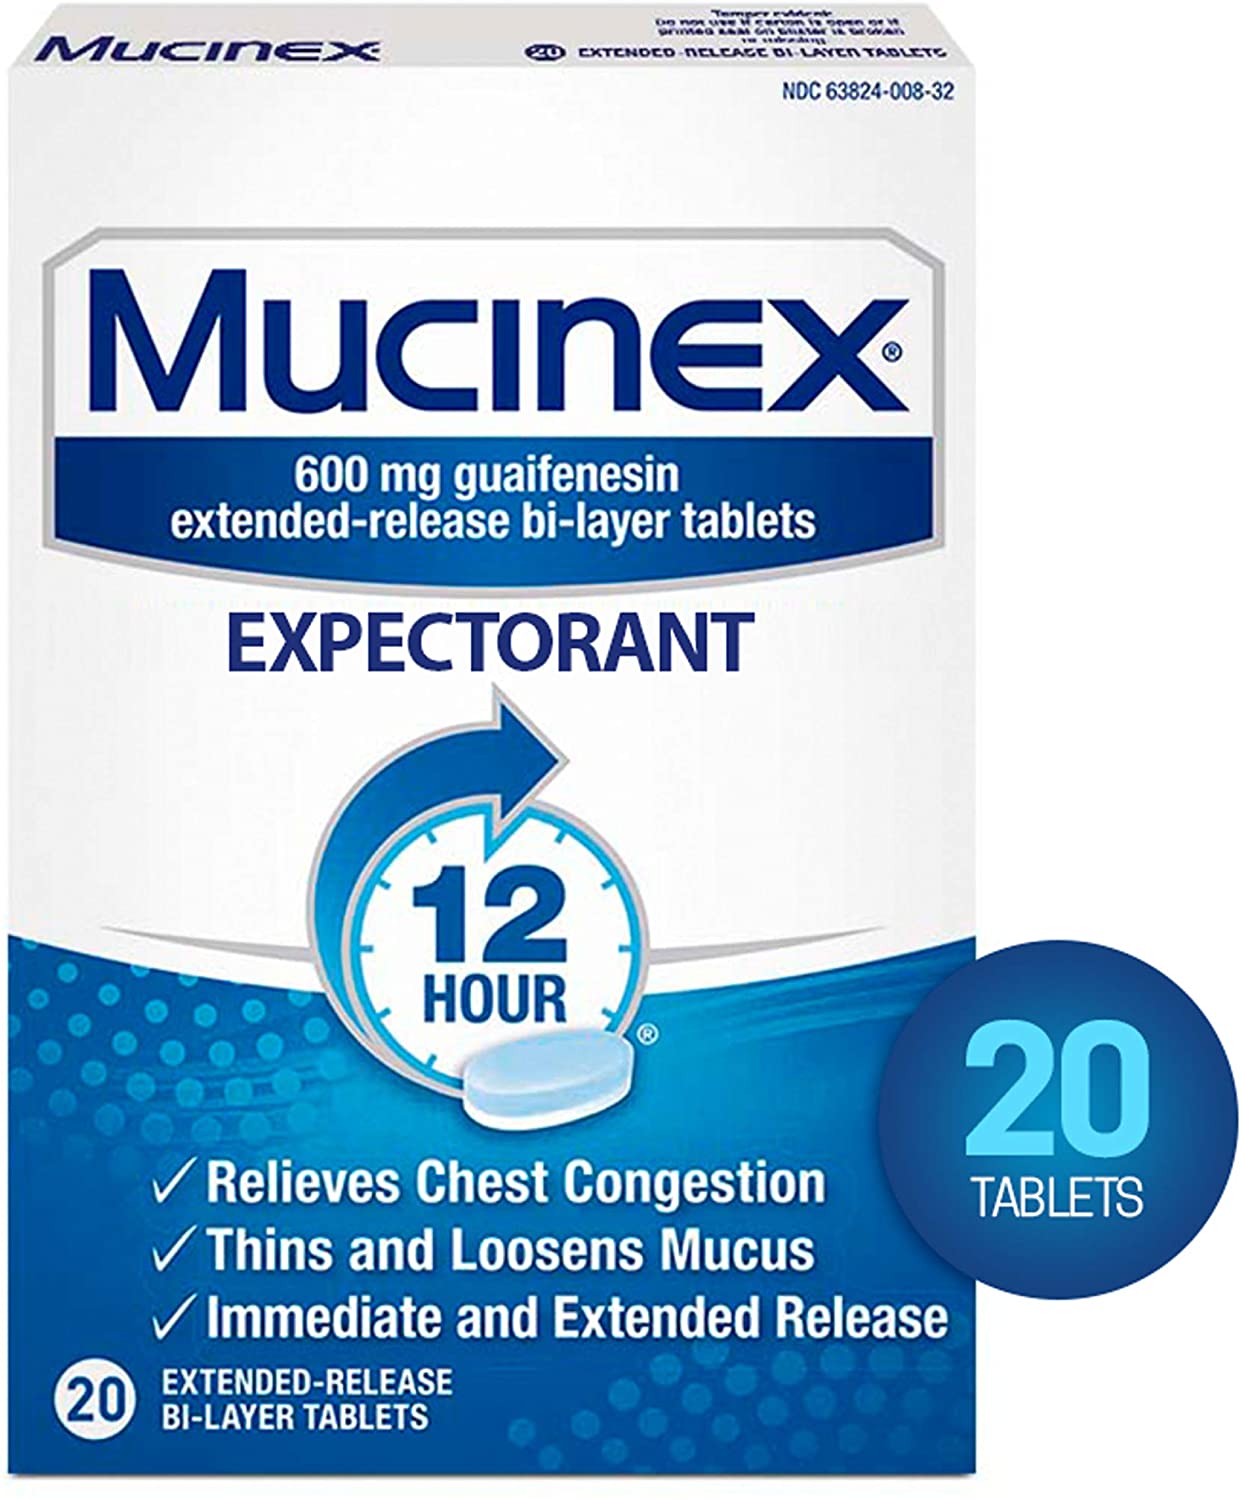 Mucinexx 600mg, 20 Tablets